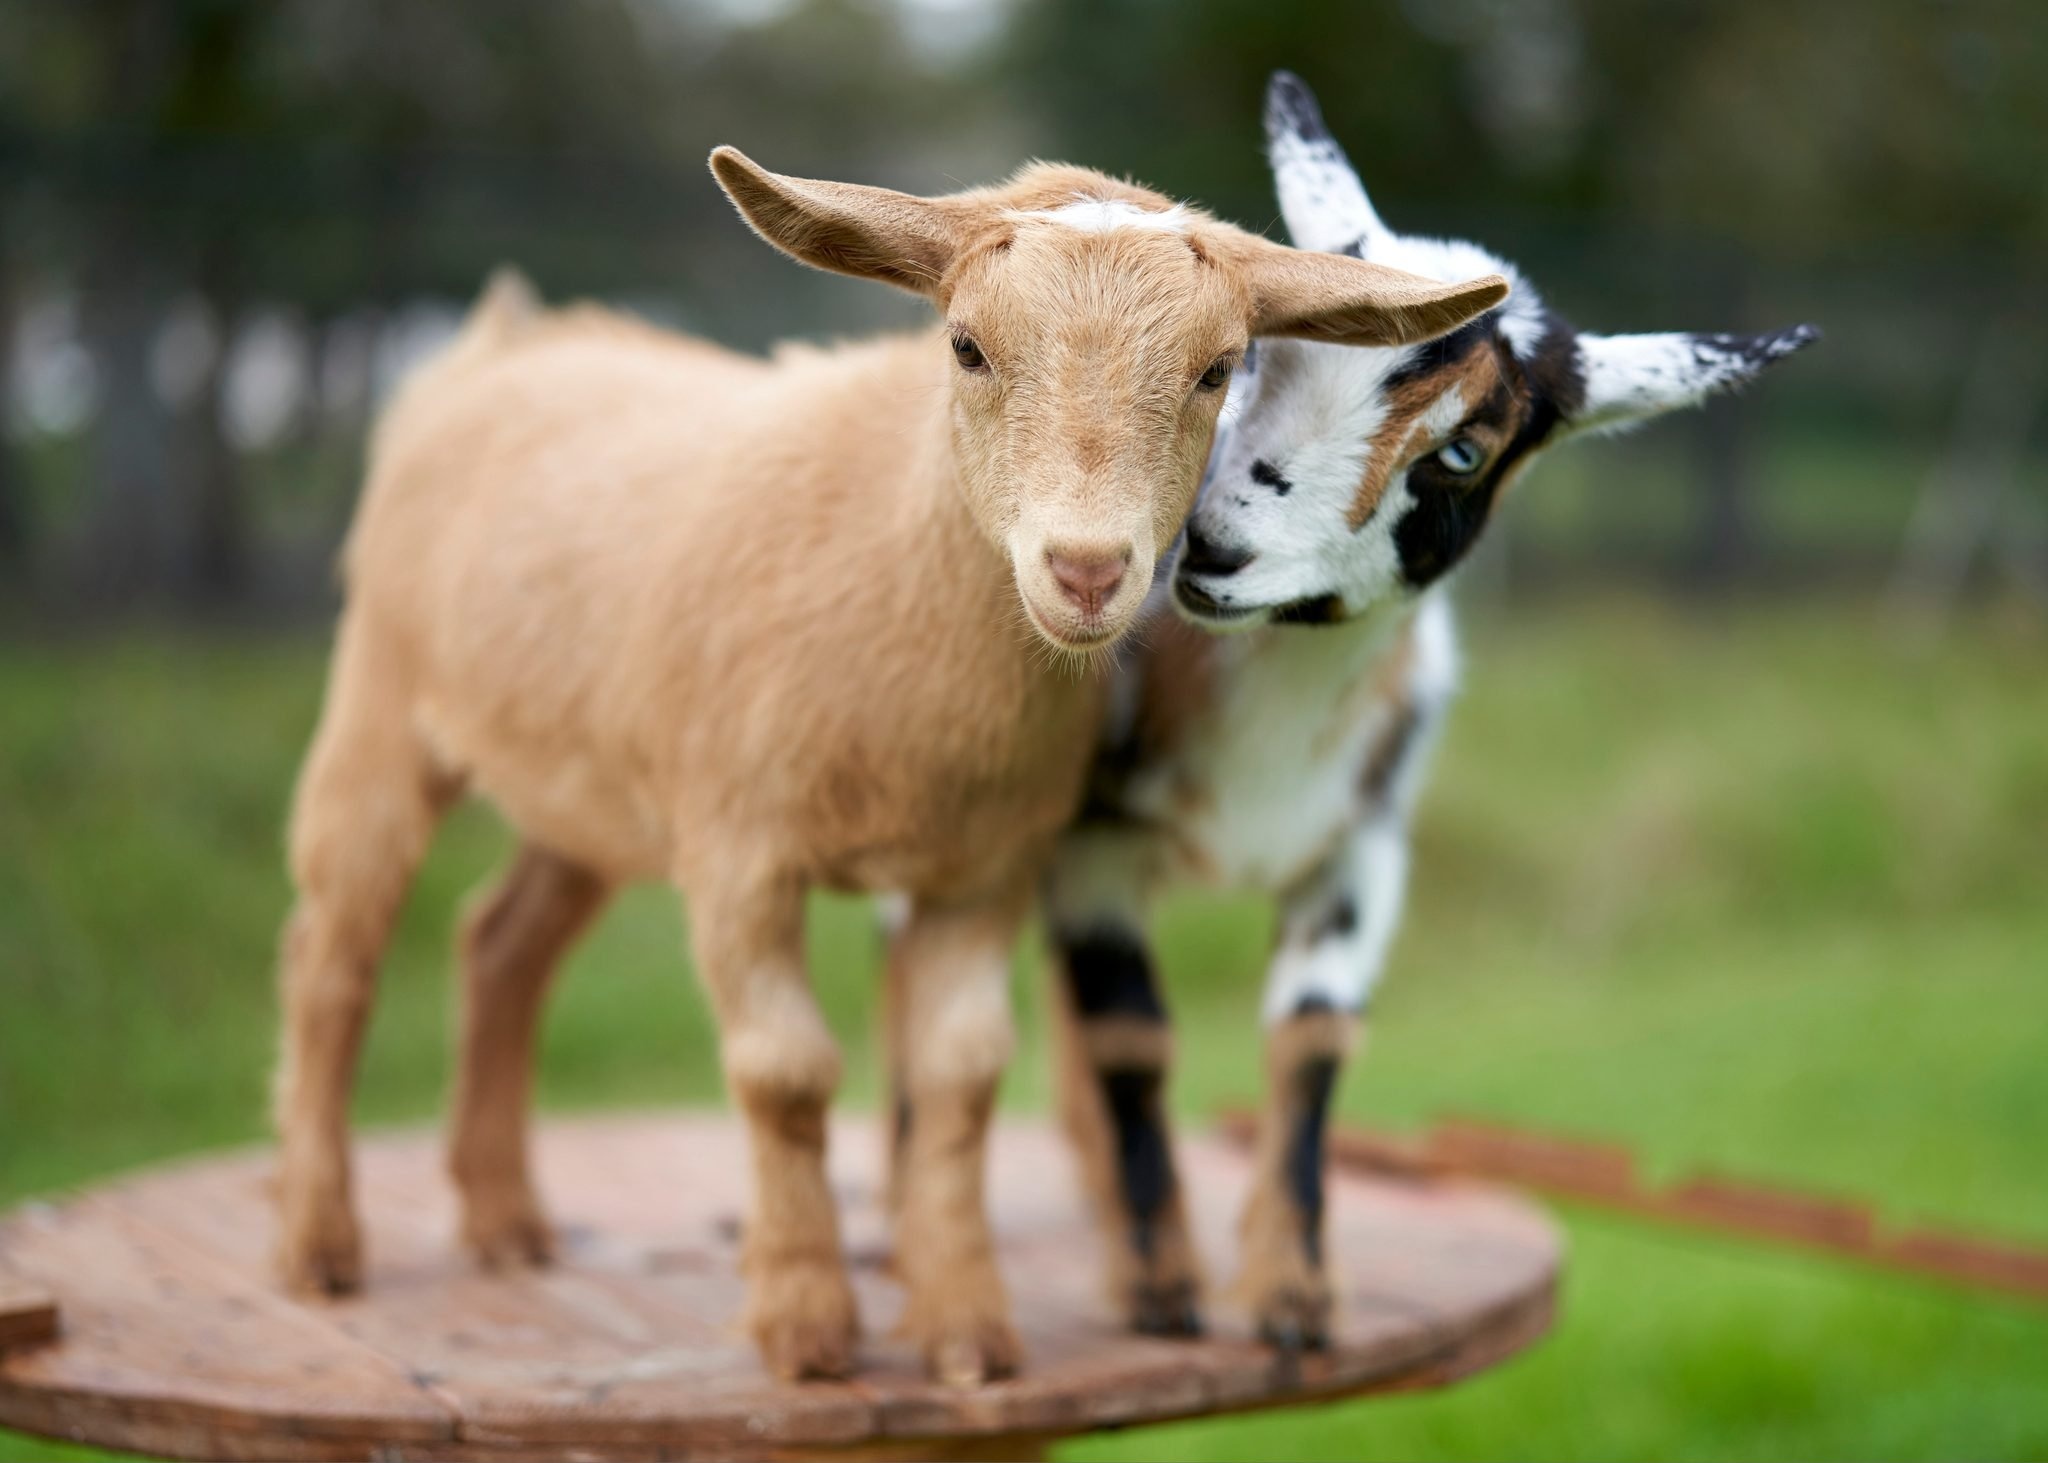 Funny goat moments, Captivating goat pictures, Amusing goat antics, Laughter-inducing goat wallpapers, 2050x1470 HD Desktop